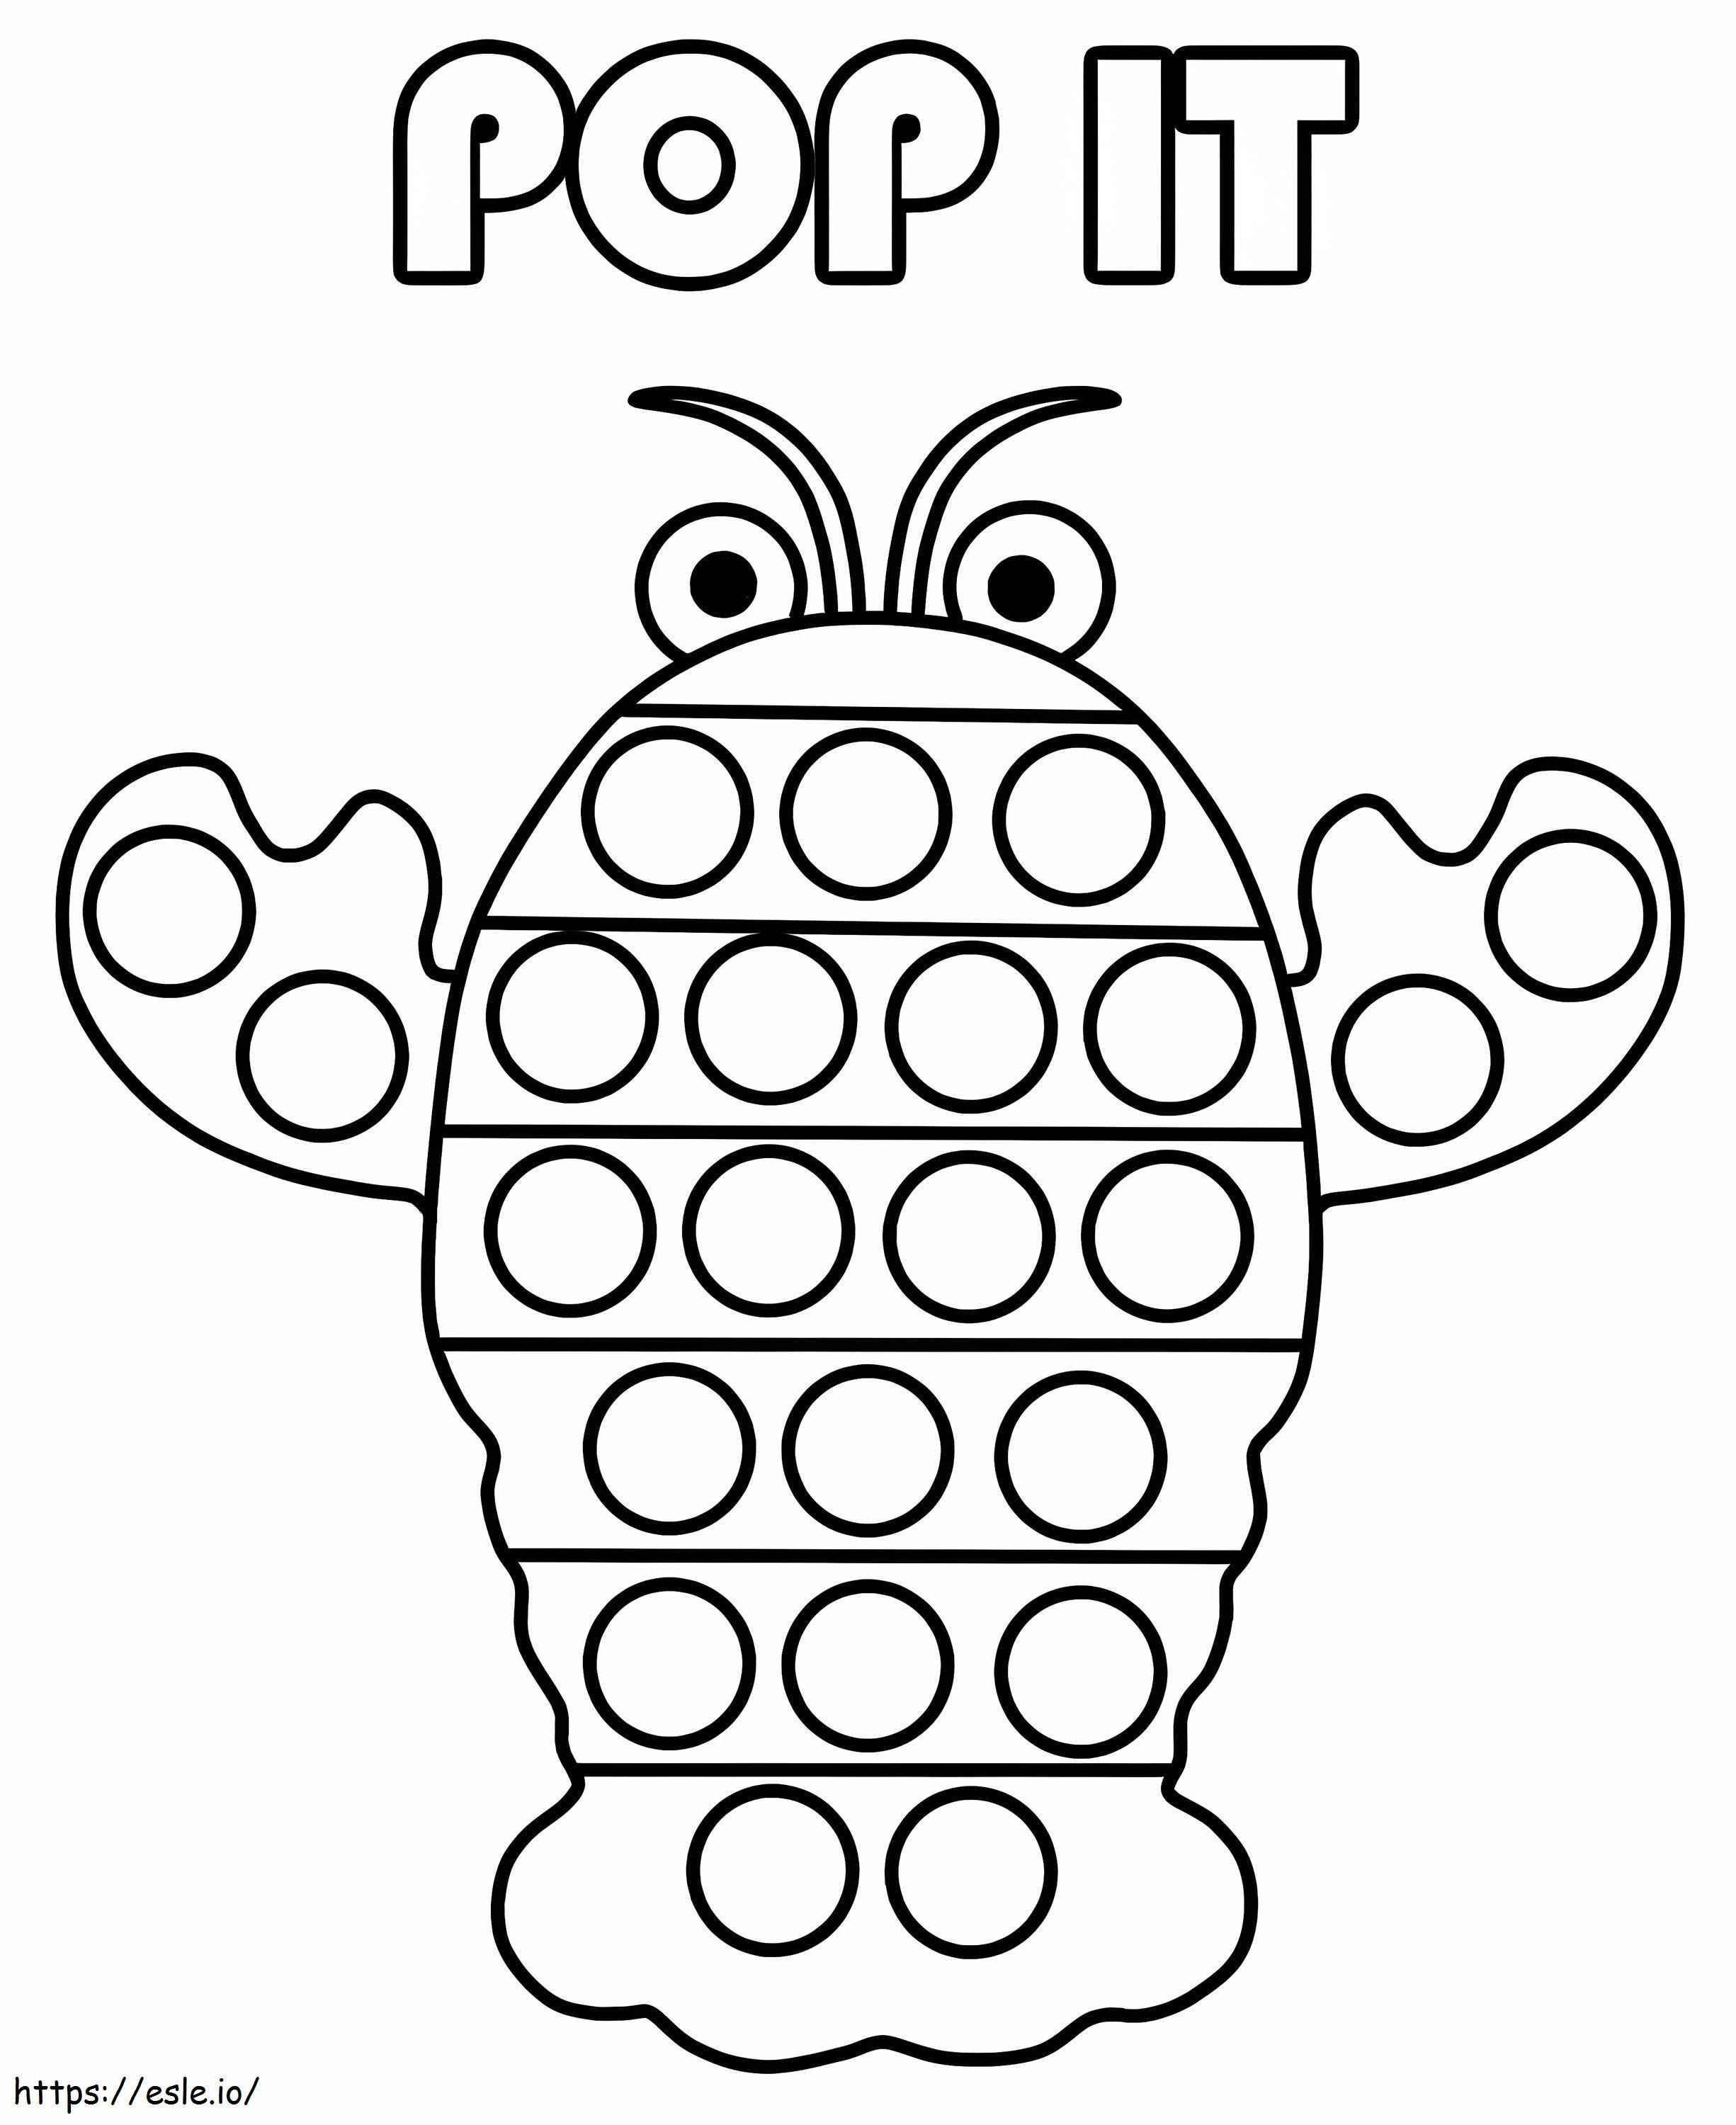 Lobster Pop It coloring page